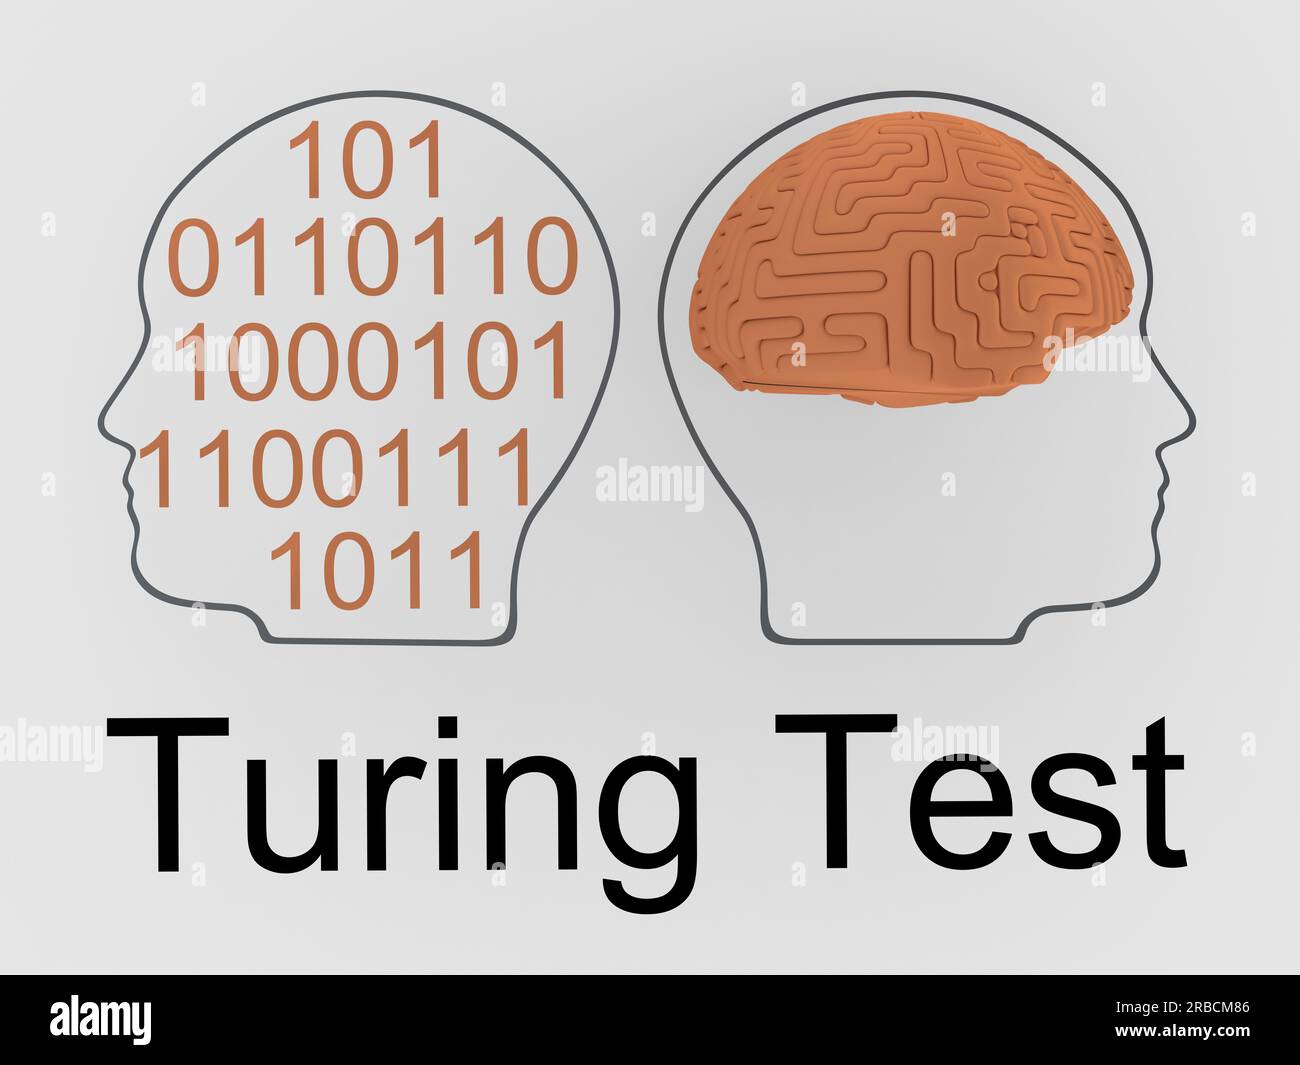 3D illustration of two head silhouettes: one contains human brain ,while the other contains a string of binary numbers, titled as Turing Test. Stock Photo